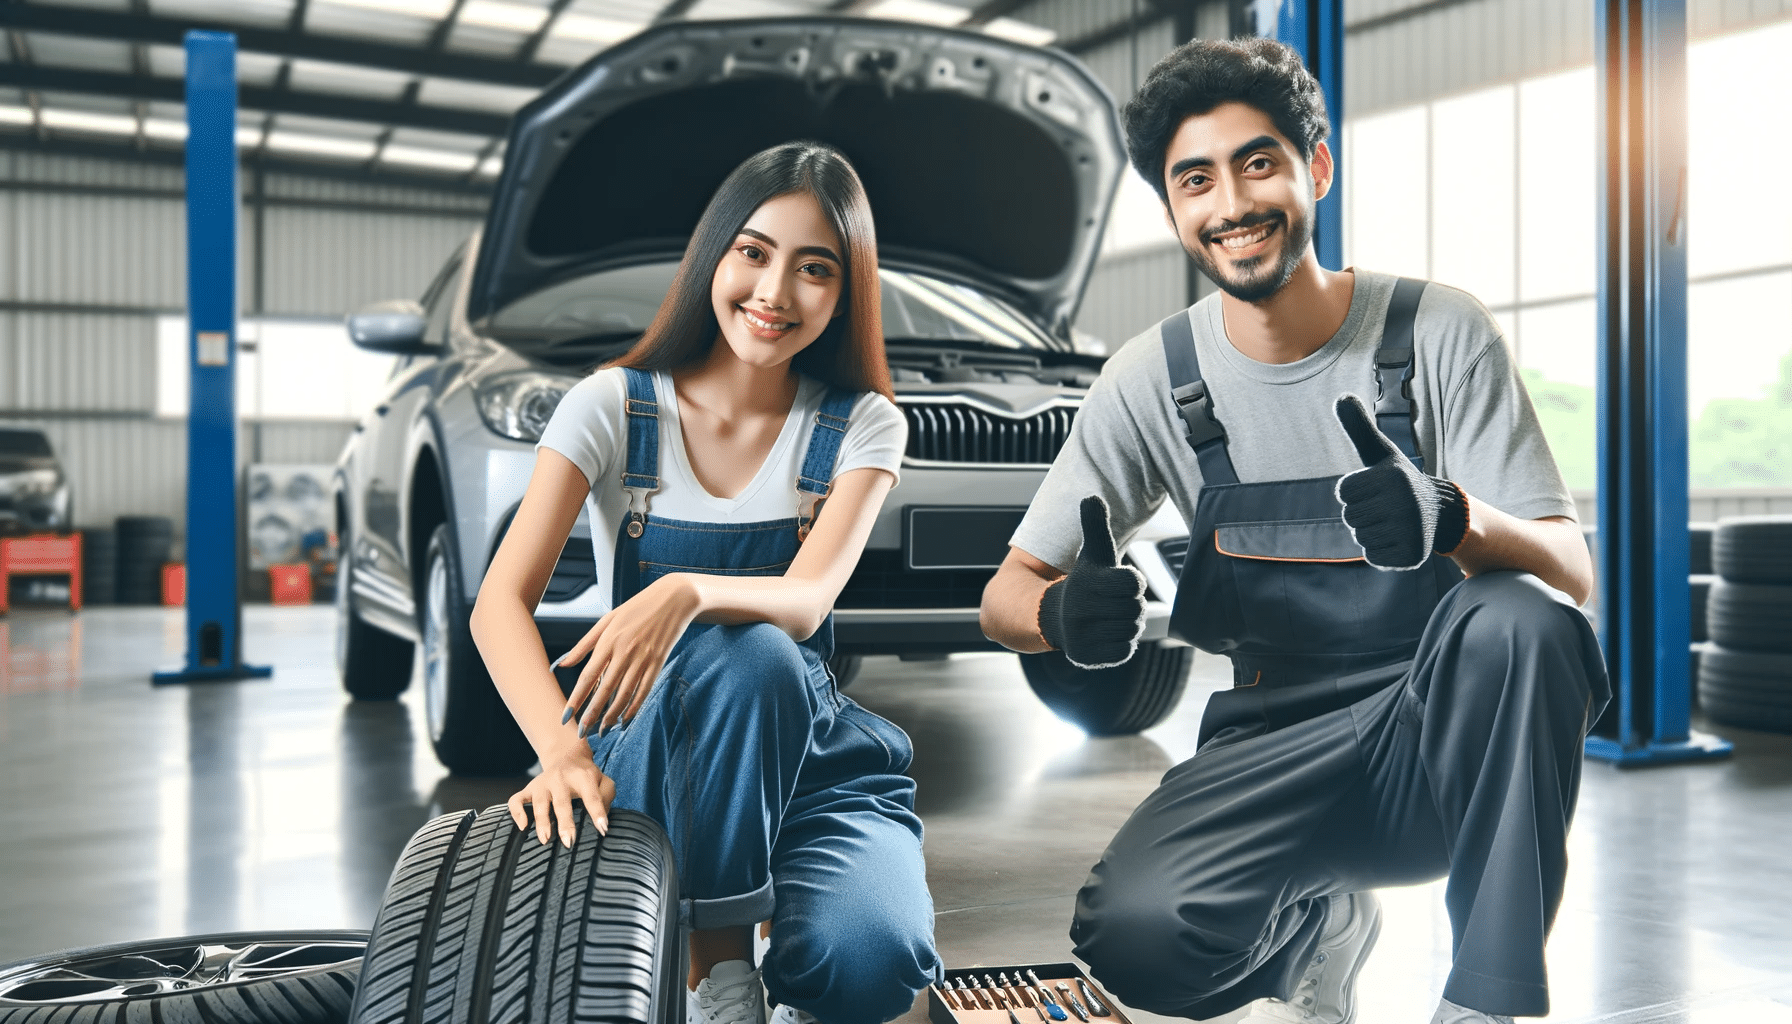 A-satisfied-customer-and-a-mechanic-giving-a-thumbs-up-in-front-of-a-car-with-new-tires-the-car-is-parked-inside-the-clean-and-modern-auto-repair-shop